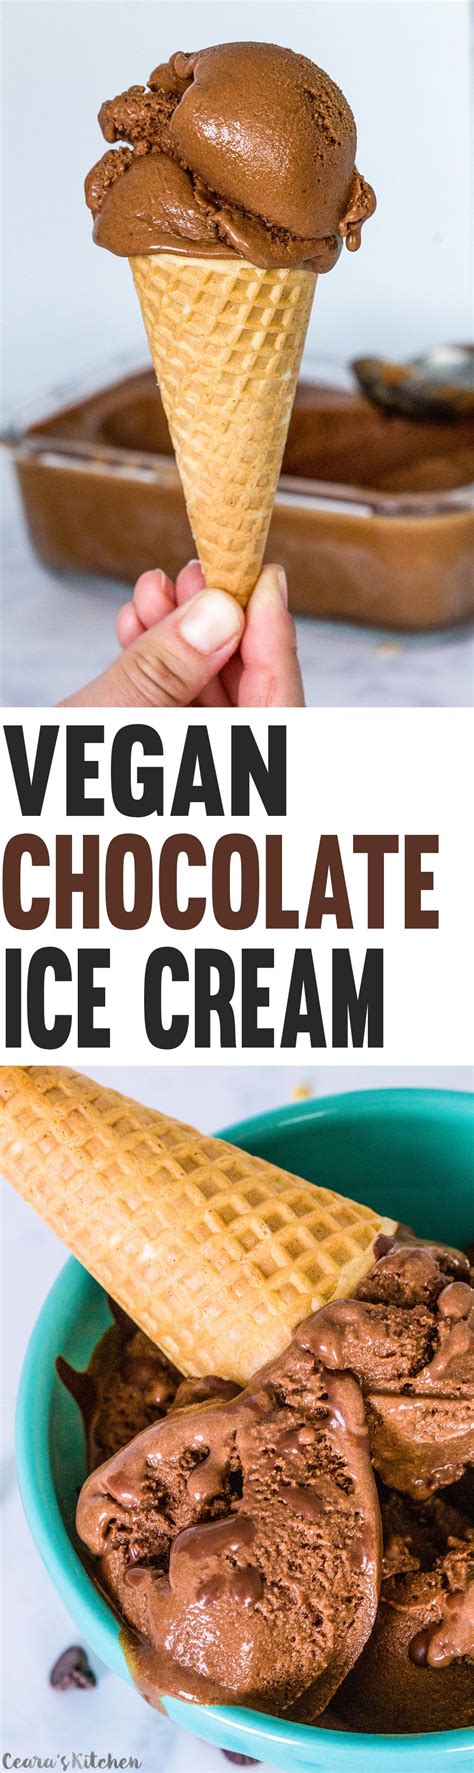 Cooking and baking without egg, milk or honey is no longer a problem and the wide choice of pastries is not only to the liking of vegans. Vegan Chocolate Ice Cream | Recipe | Vegan dessert recipes, Vegan desserts, Dessert recipes